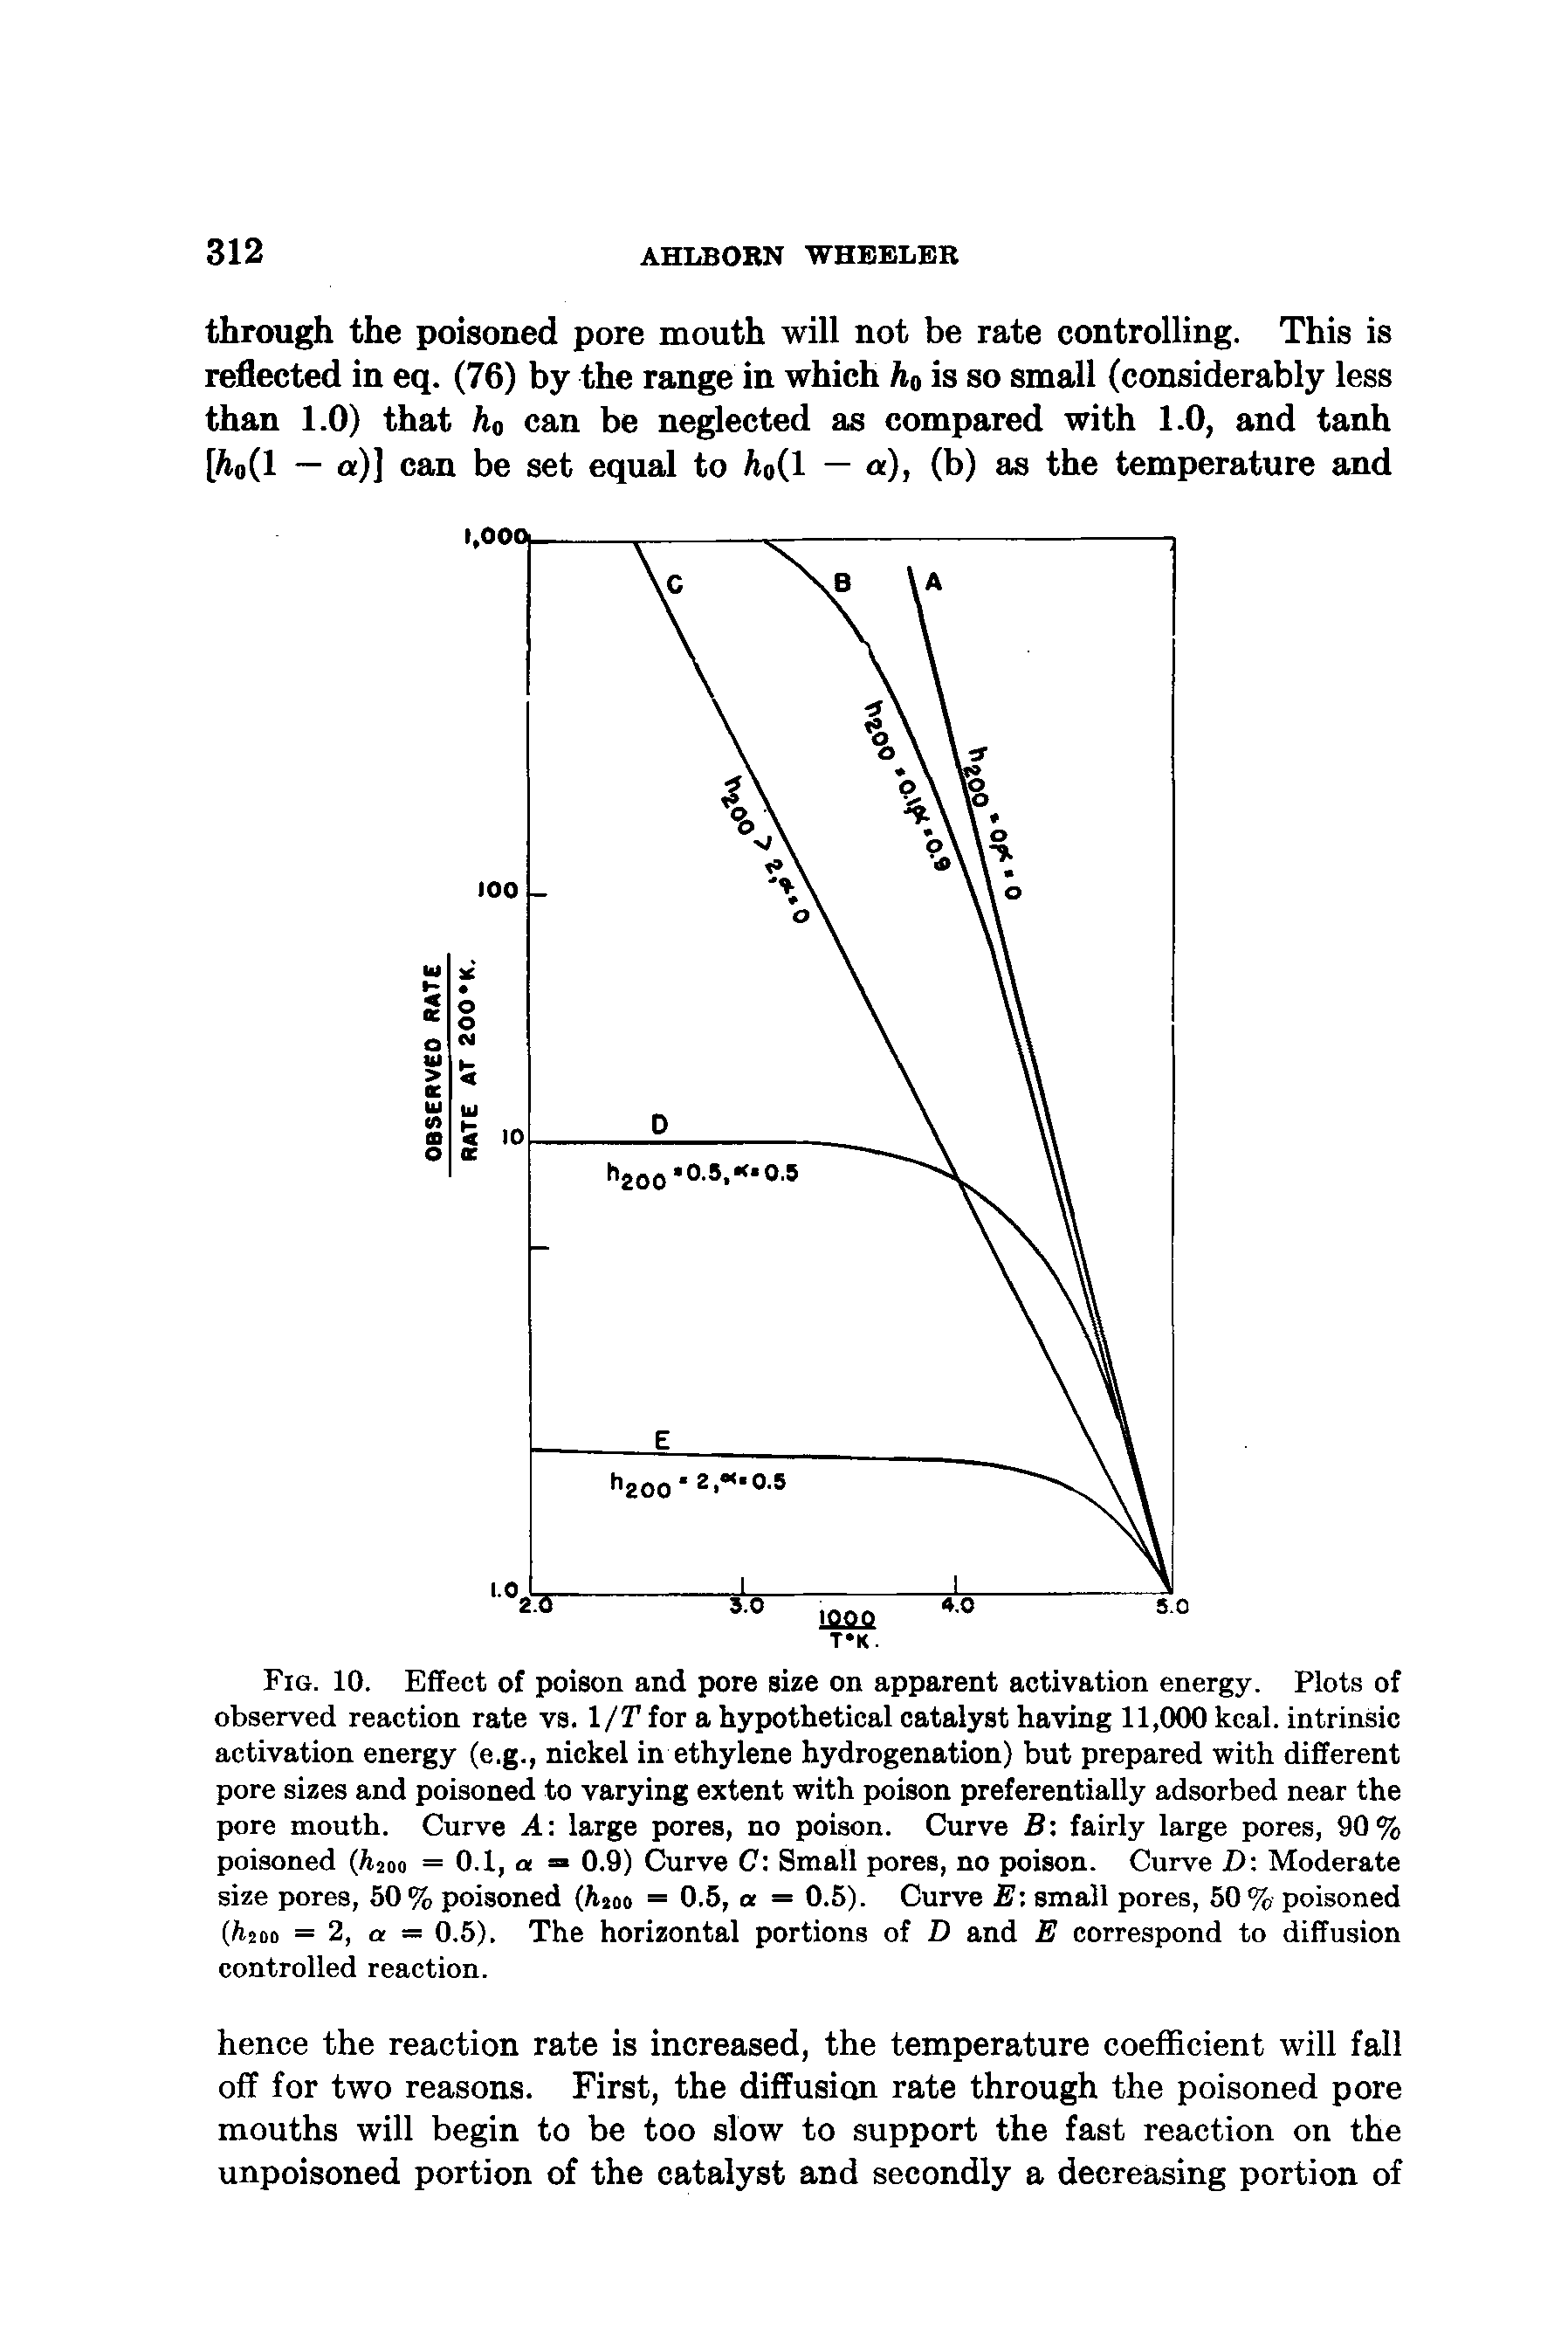 Fig. 10. Effect of poison and pore size on apparent activation energy. Plots of observed reaction rate vs. 1/T for a hypothetical catalyst having 11,000 kcal. intrinsic activation energy (e.g., nickel in ethylene hydrogenation) but prepared with different pore sizes and poisoned to varying extent with poison preferentially adsorbed near the pore mouth. Curve A large pores, no poison. Curve B fairly large pores, 90% poisoned (hioo = 0.1, a = 0.9) Curve C Small pores, no poison. Curve D Moderate size pores, 50 % poisoned (h o 0.5, a — 0.5). Curve E small pores, 50 % poisoned (hno = 2, = 0.5). The horizontal portions of D and E correspond to diffusion controlled reaction.